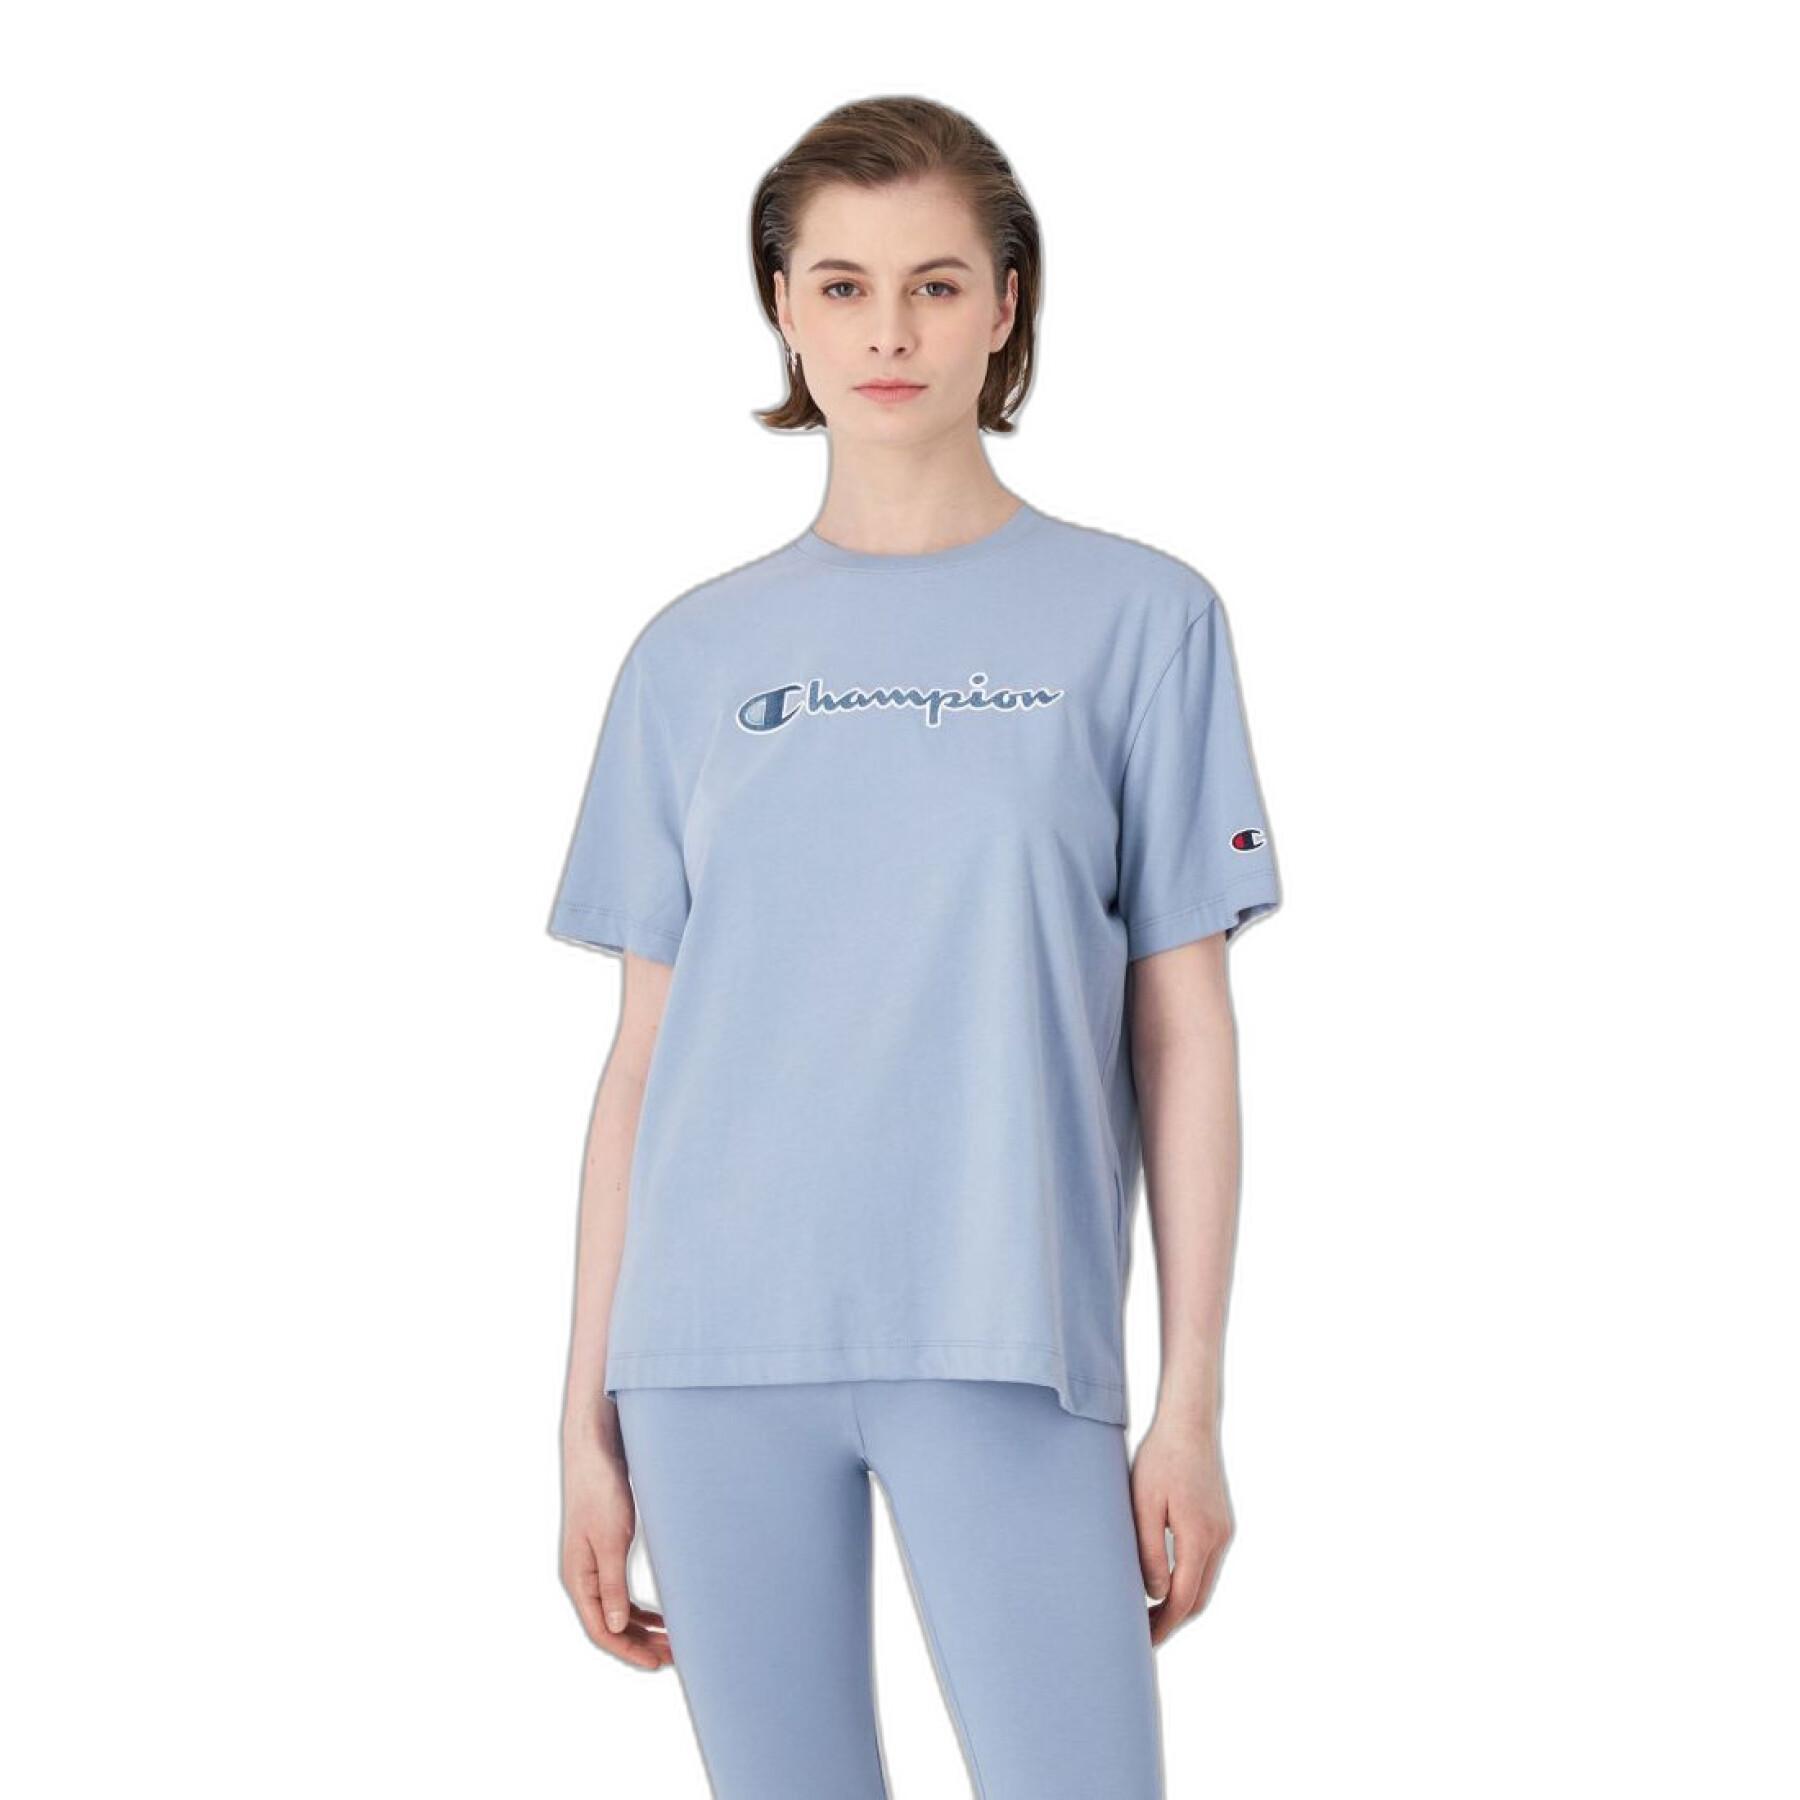 Shop for HH CUP, Blue, Womens